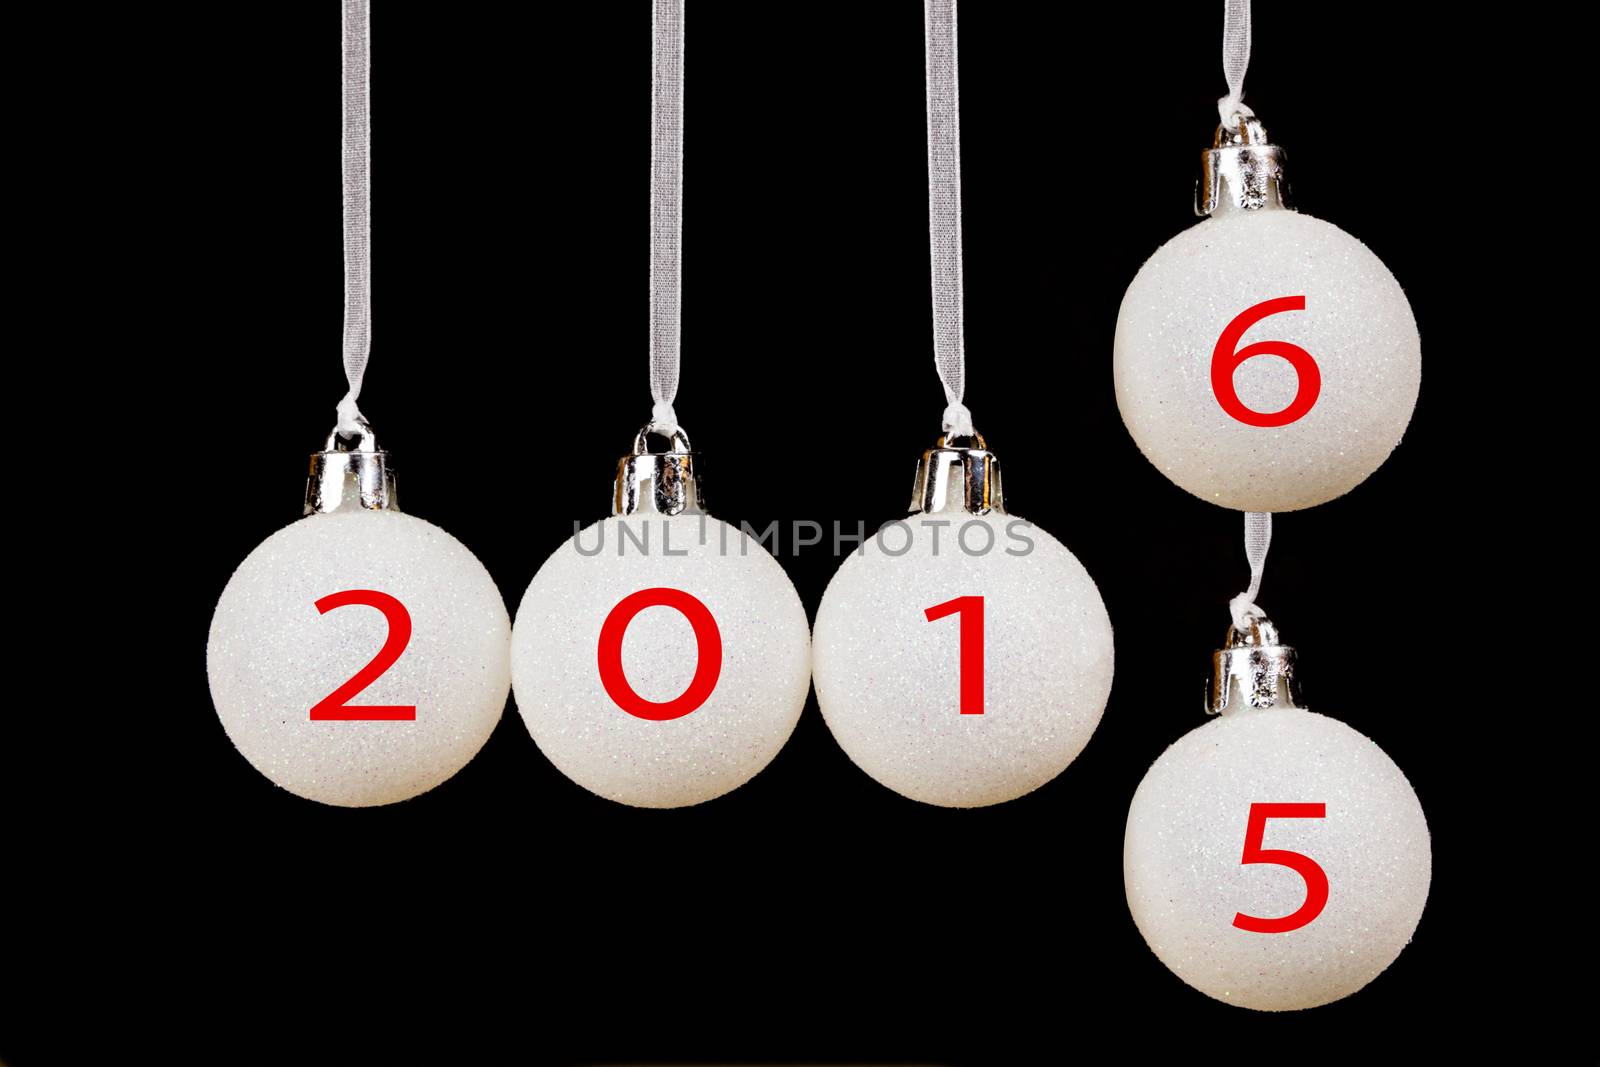 White christmas balls with dates 2015 and 2016 on black backgrou by BenSchonewille